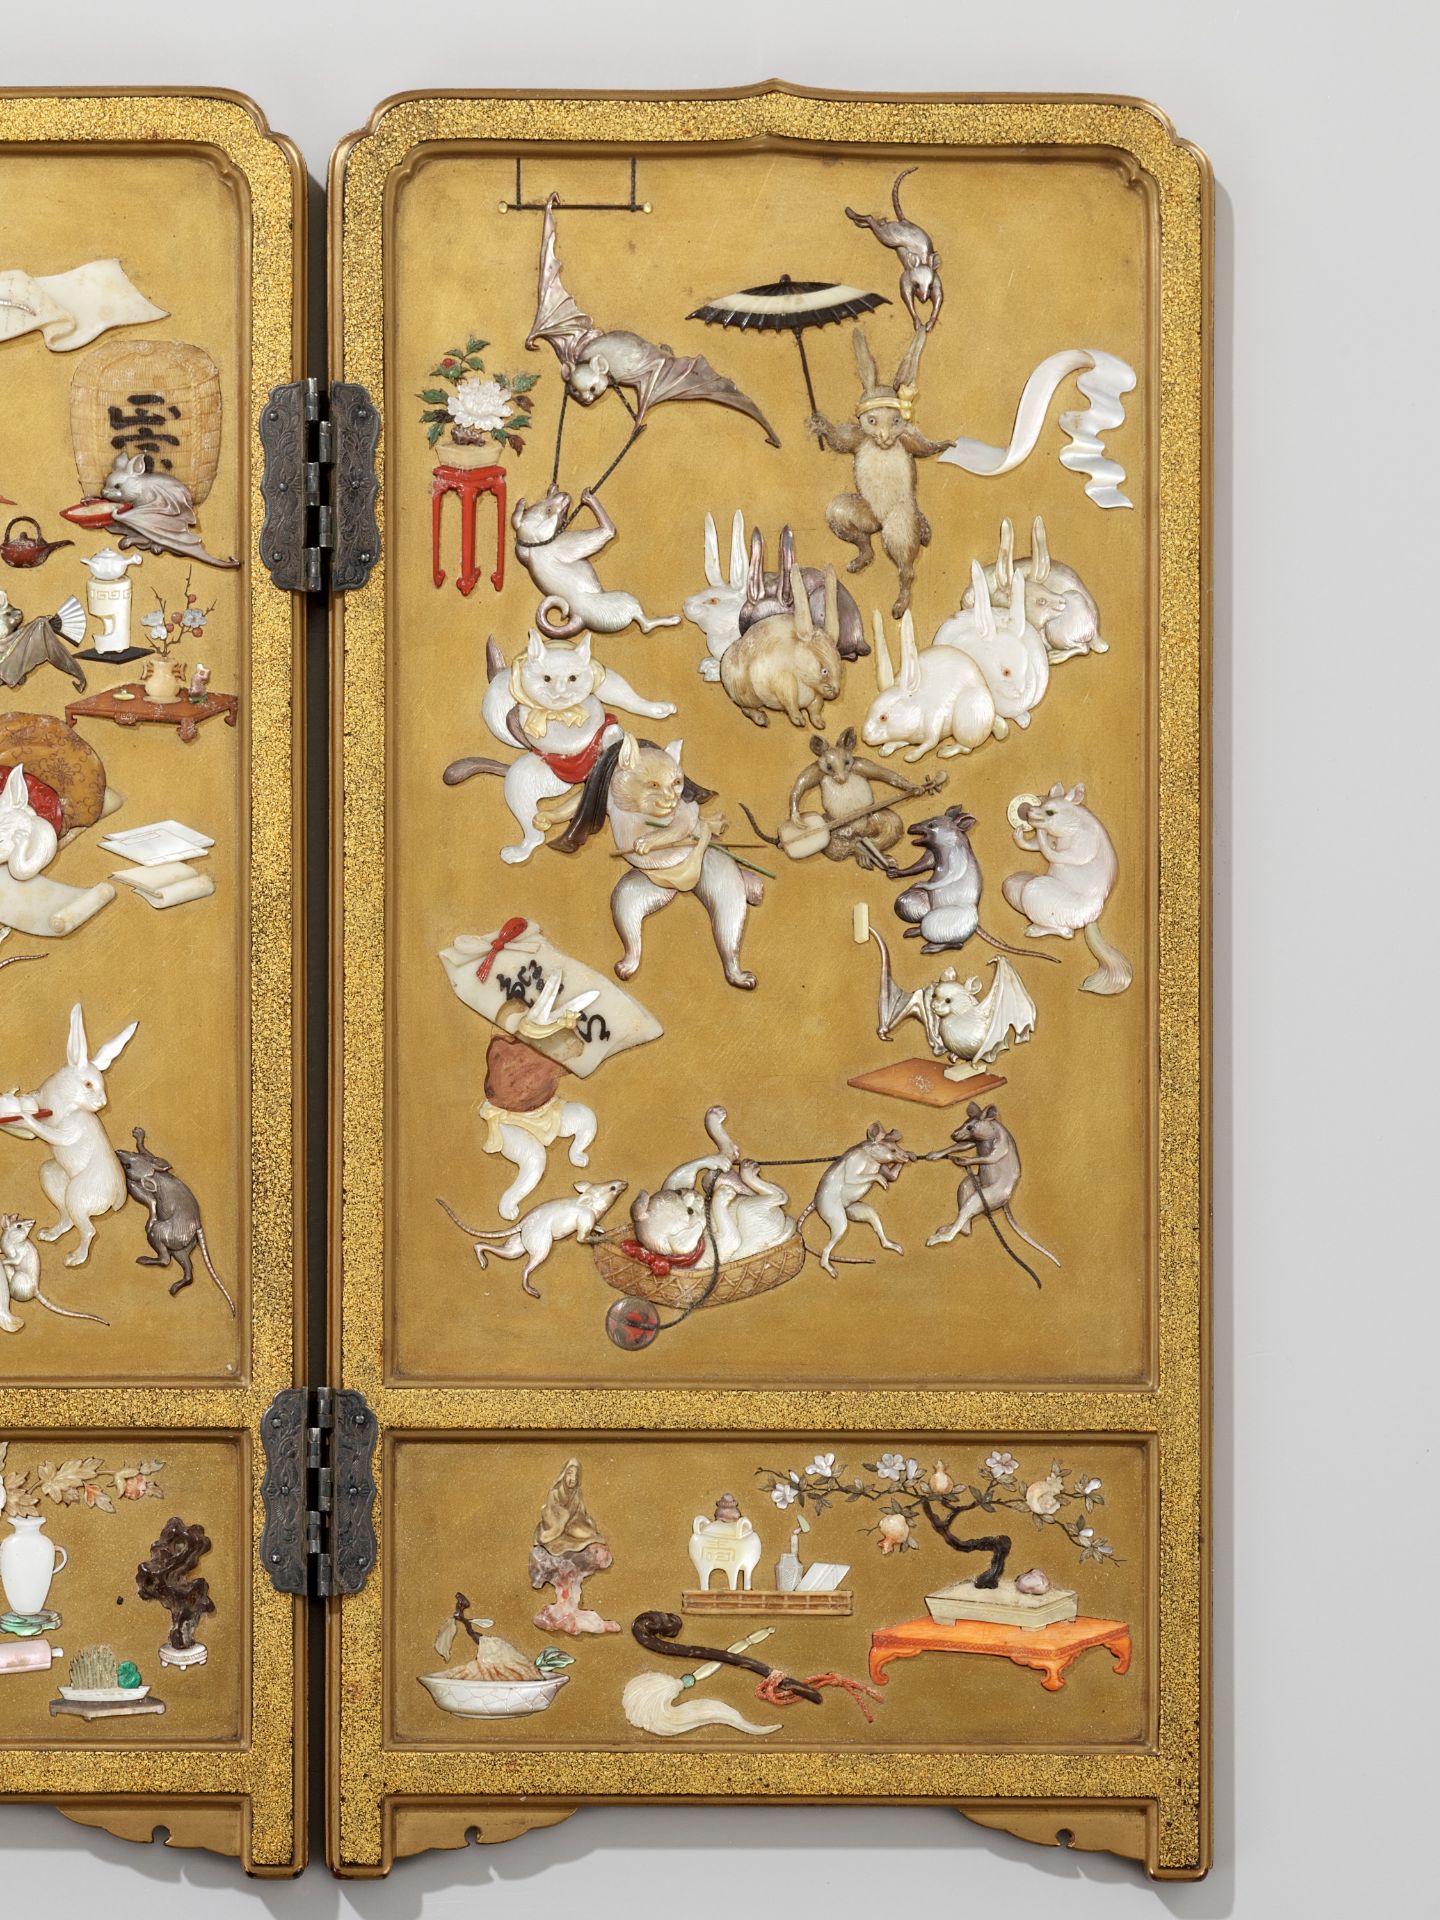 A RARE AND SUPERB SHIBAYAMA-STYLE INLAID GOLD LACQUER TABLE SCREEN WITH KYOSAI'S ANIMAL CIRCUS - Bild 8 aus 11